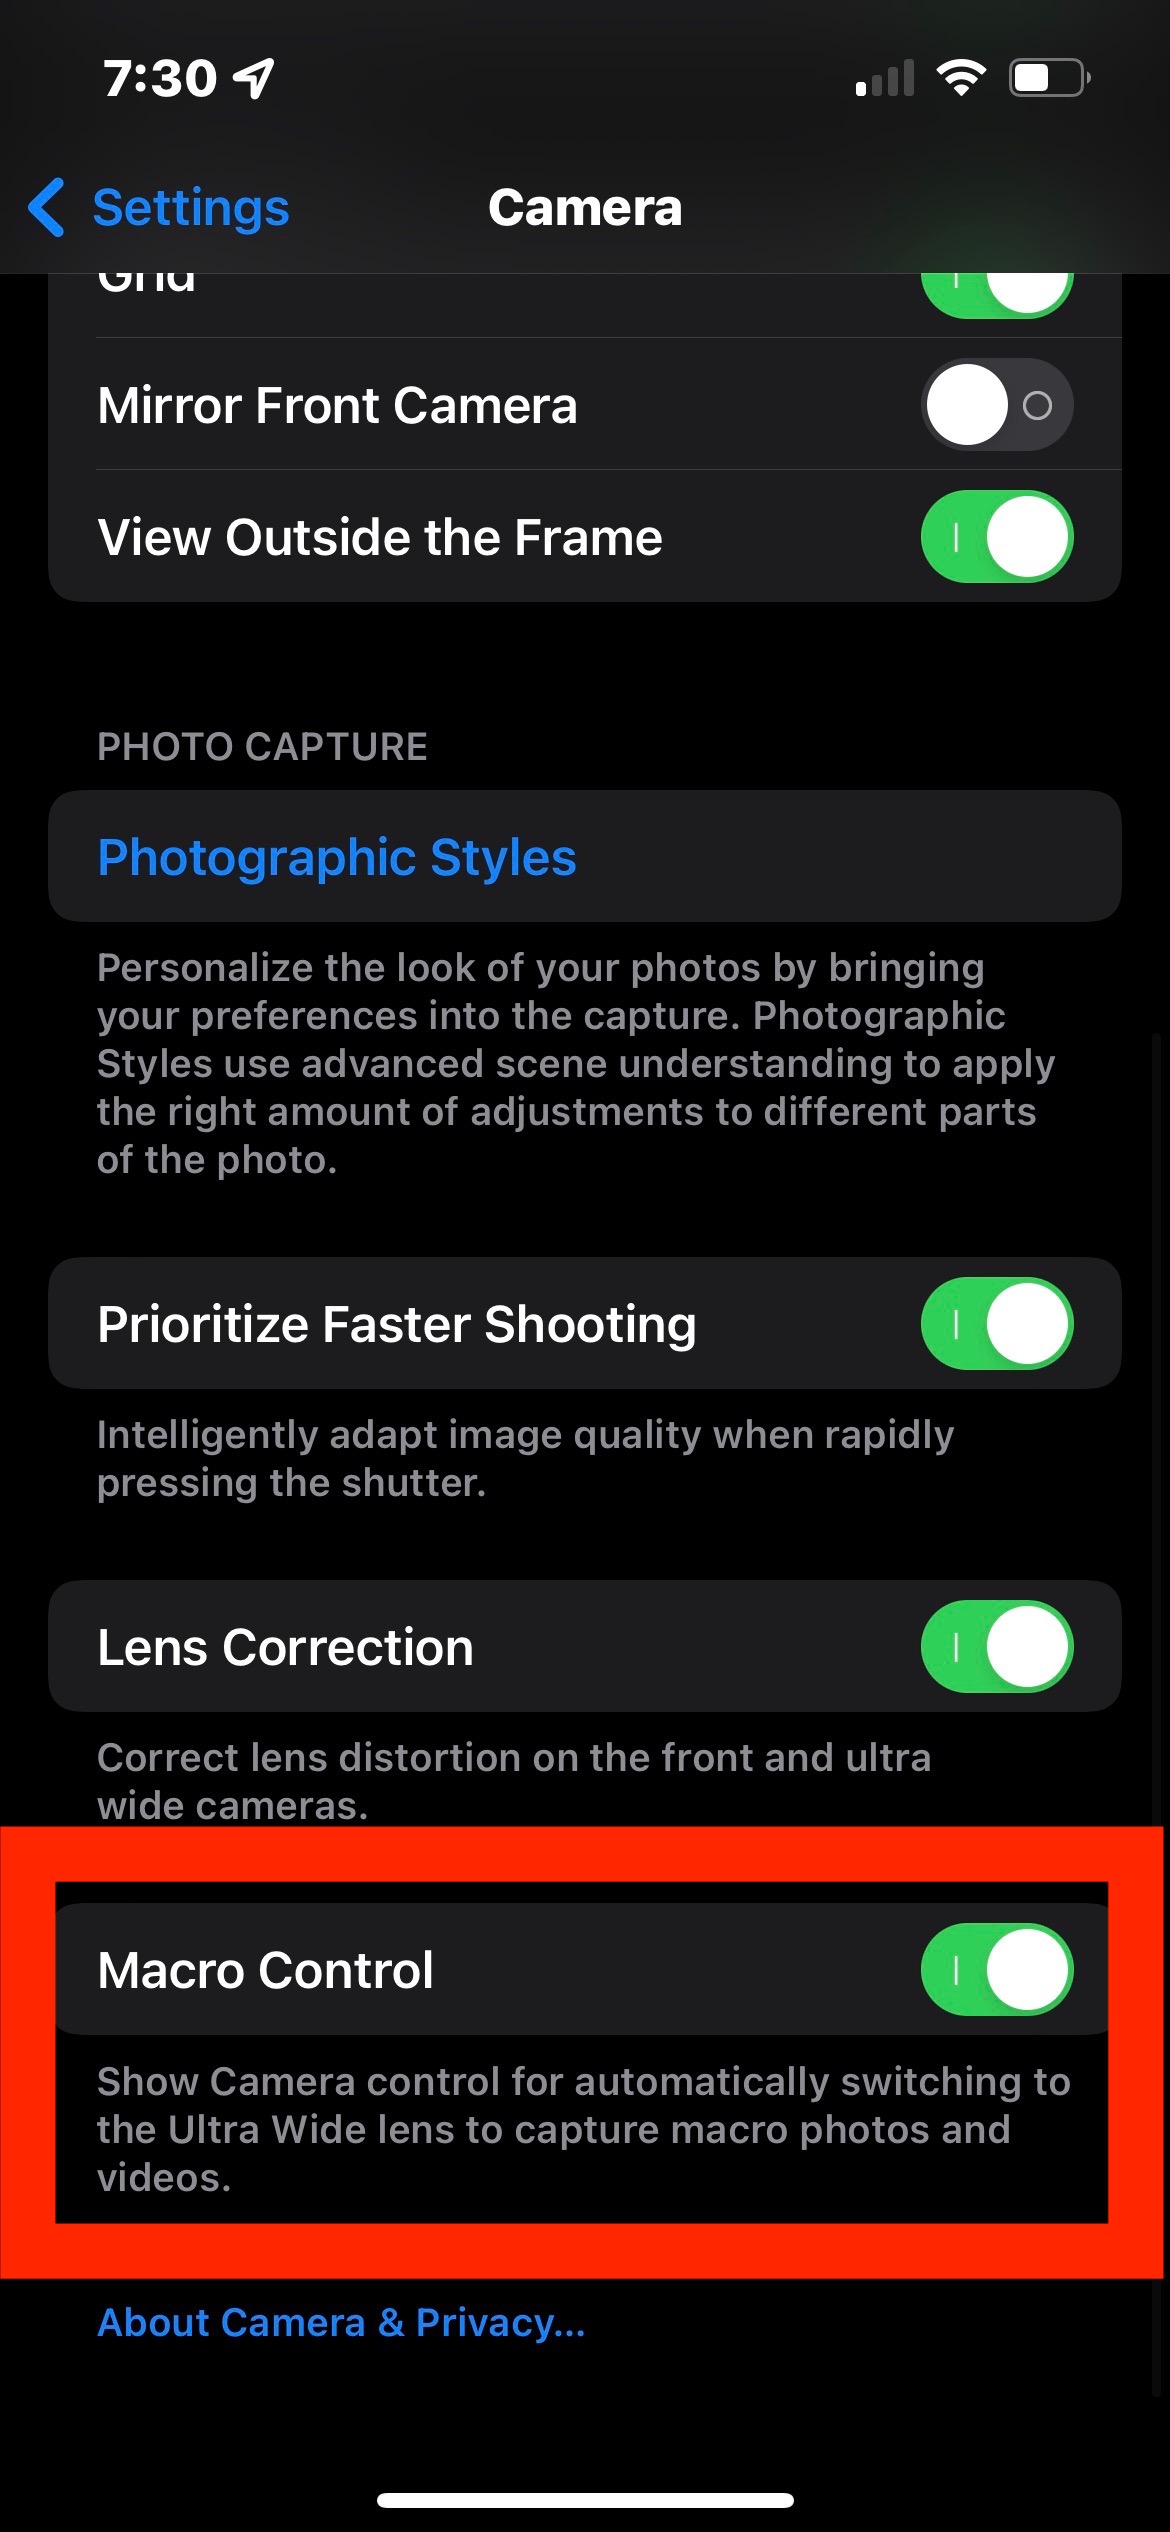 How to Enable or Disable Macro Camera Controls on iPhone 13 Pro